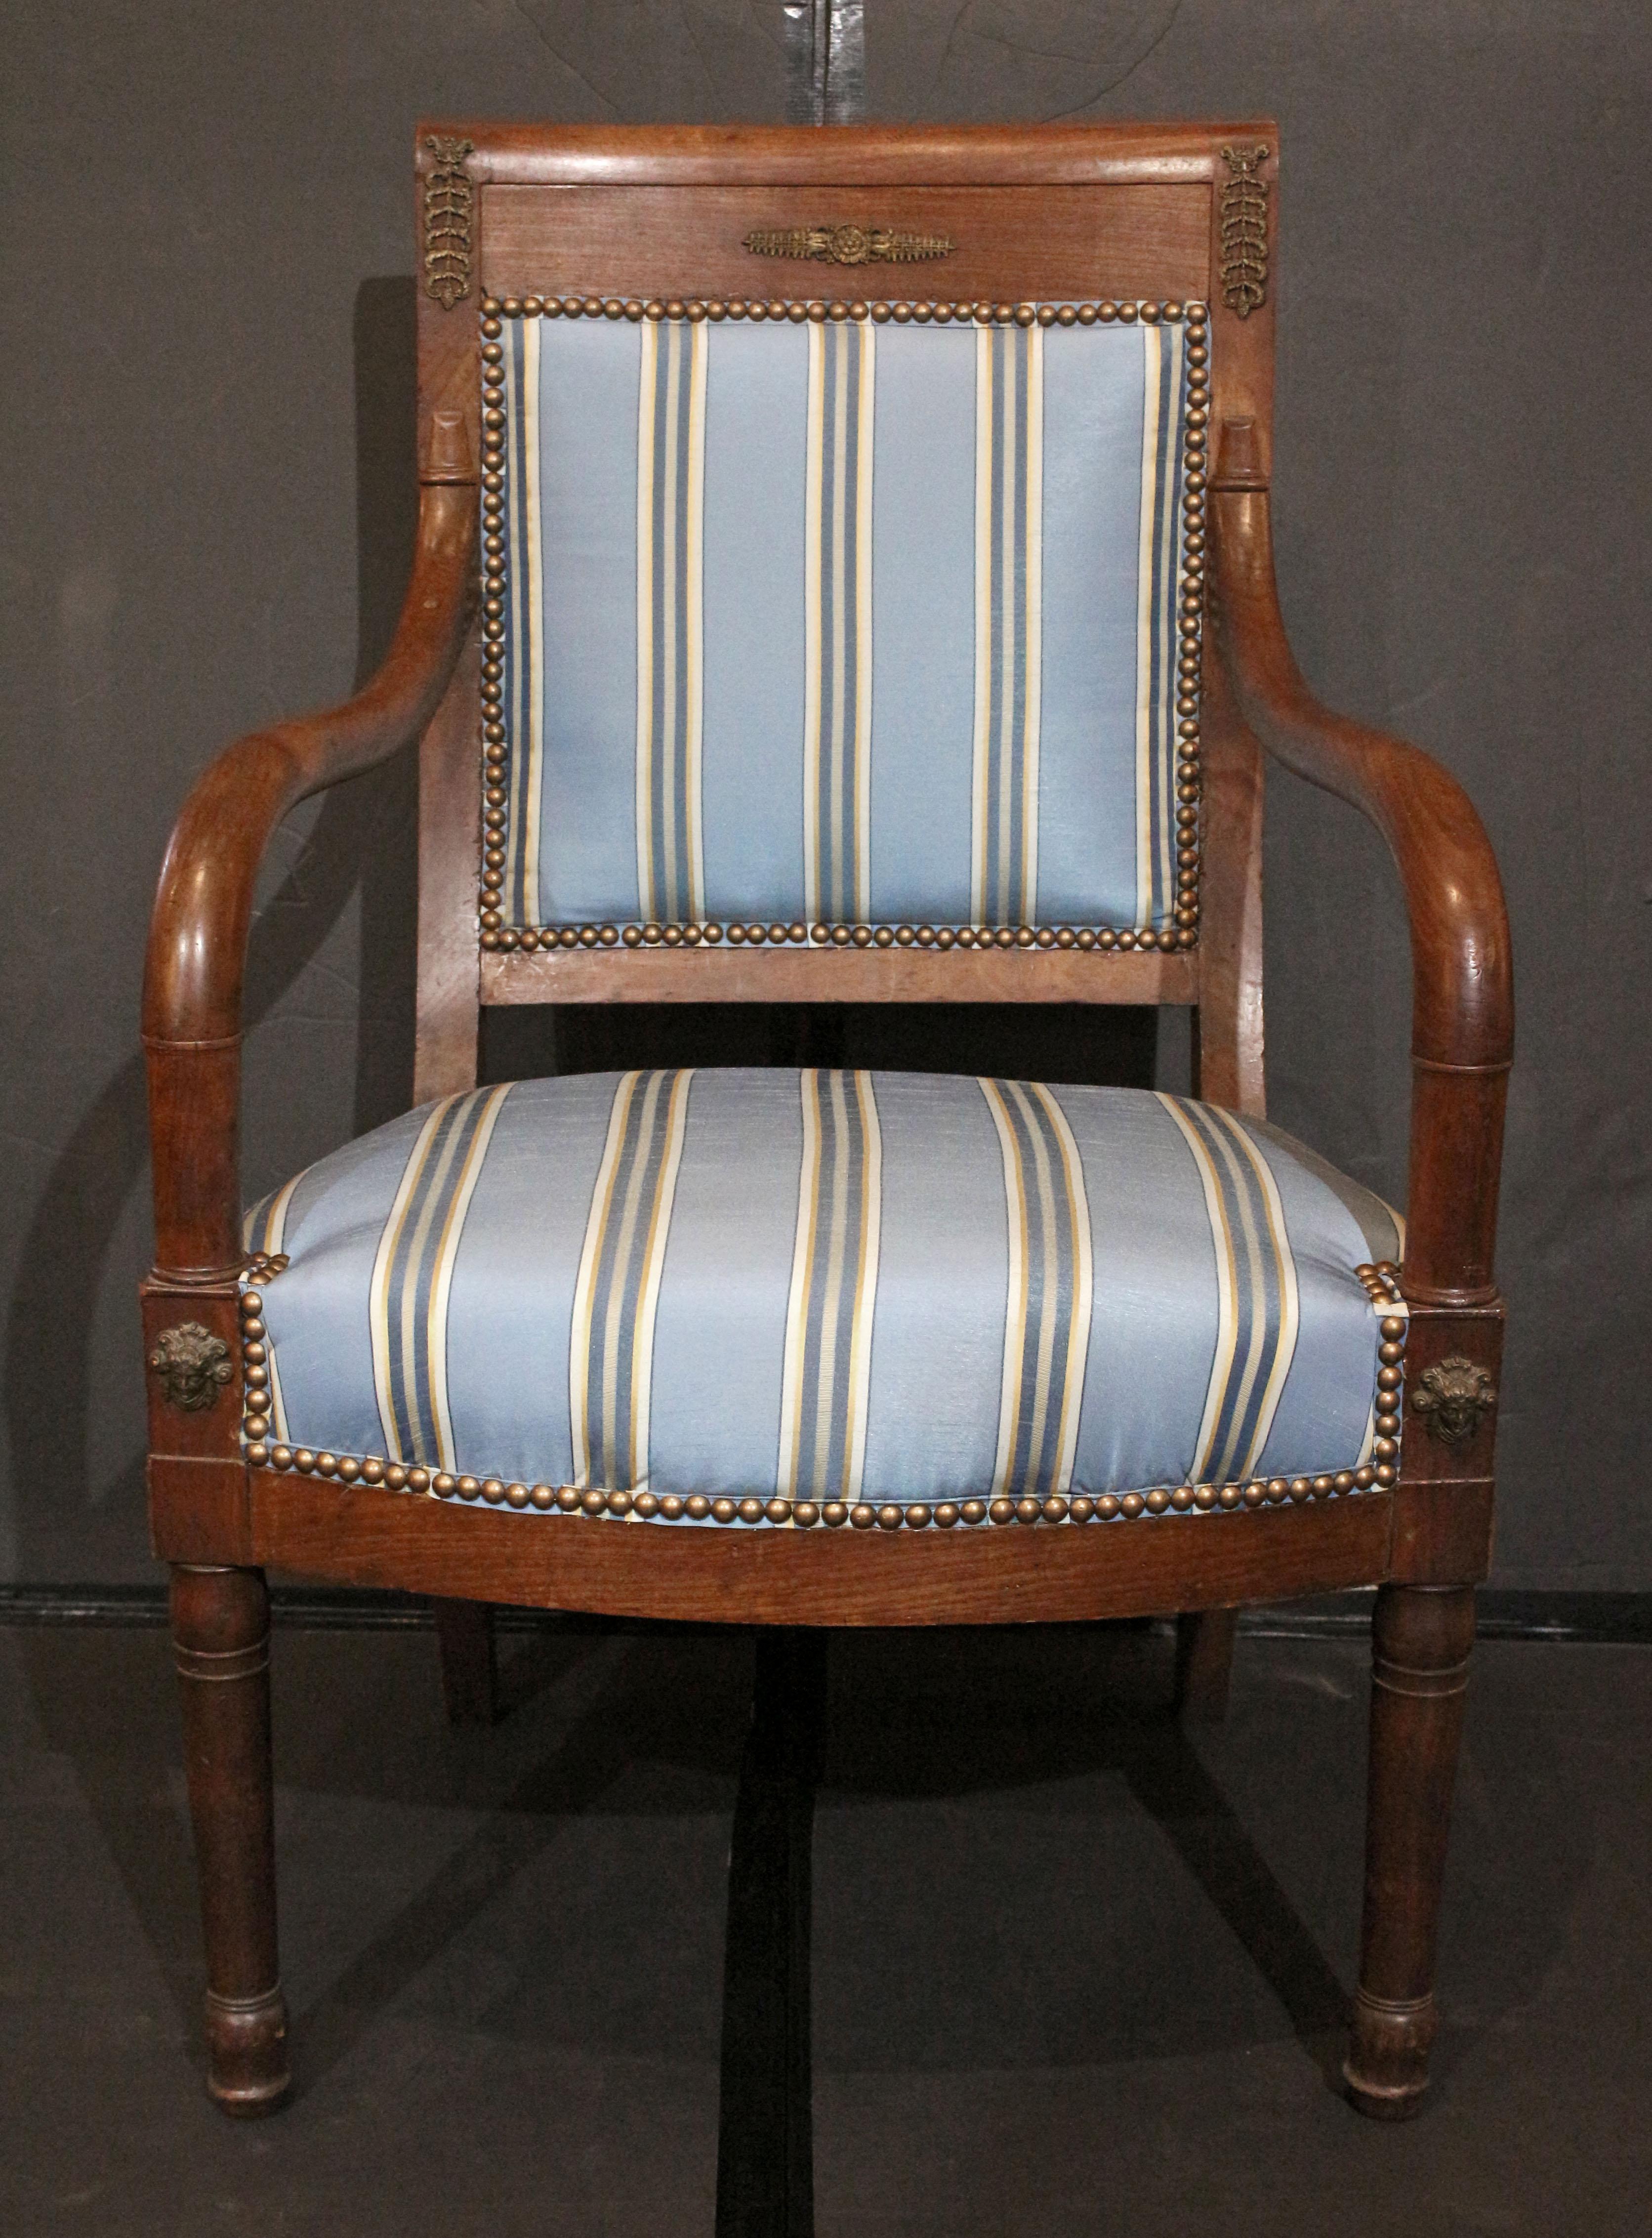 Circa 1800-1815 fauteuil or open arm chair, French. Mahogany. Directoire to Empire period & style. Brass mounts. Turned, tapered legs with ring turned carving. Newly upholstered in a blue silk fabric with stripes.
23.25